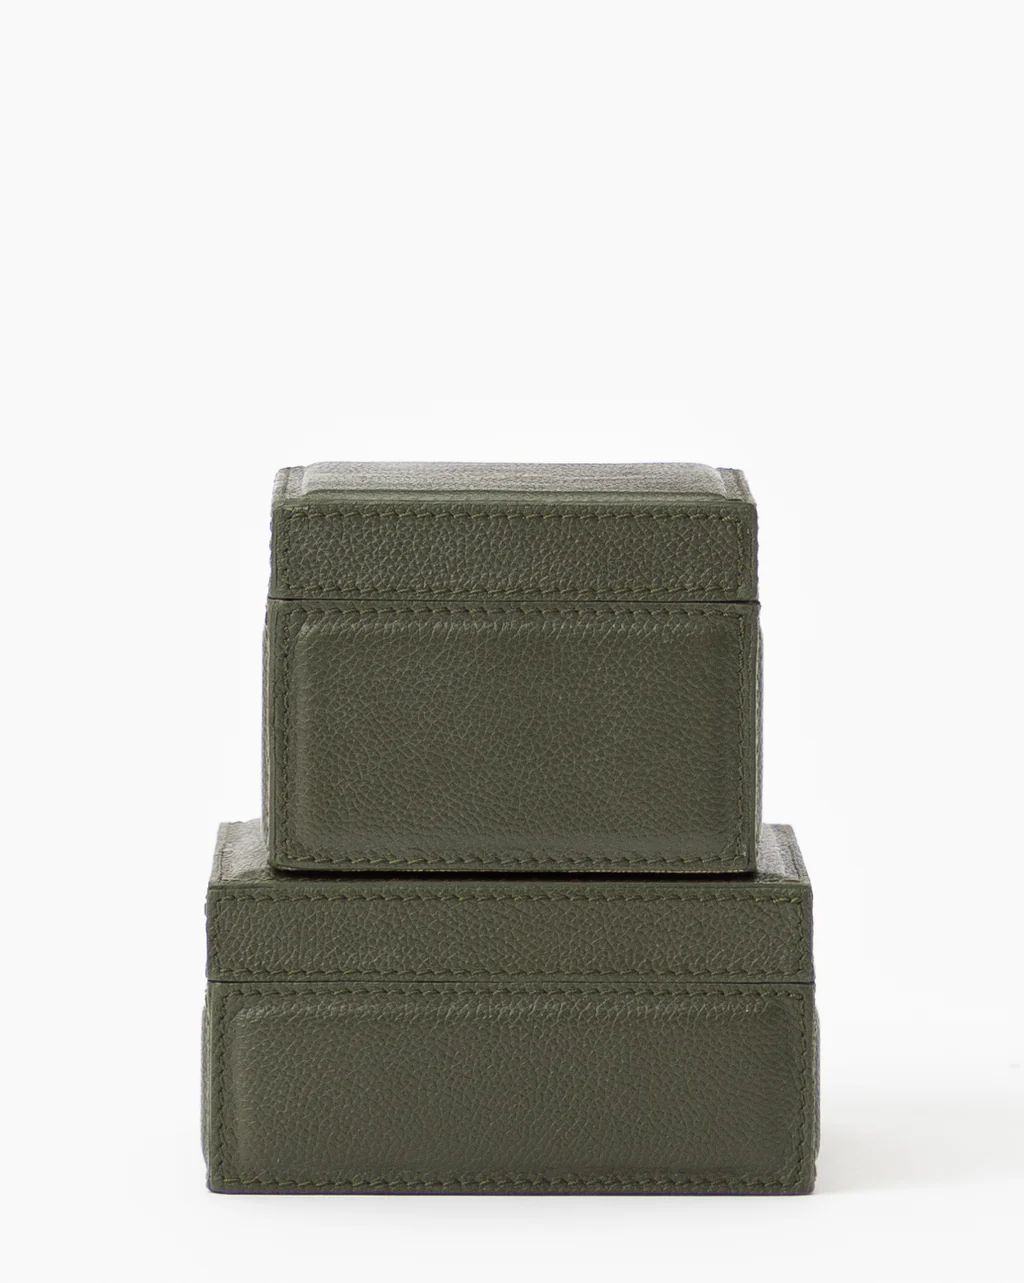 Green Leather Box | McGee & Co. (US)